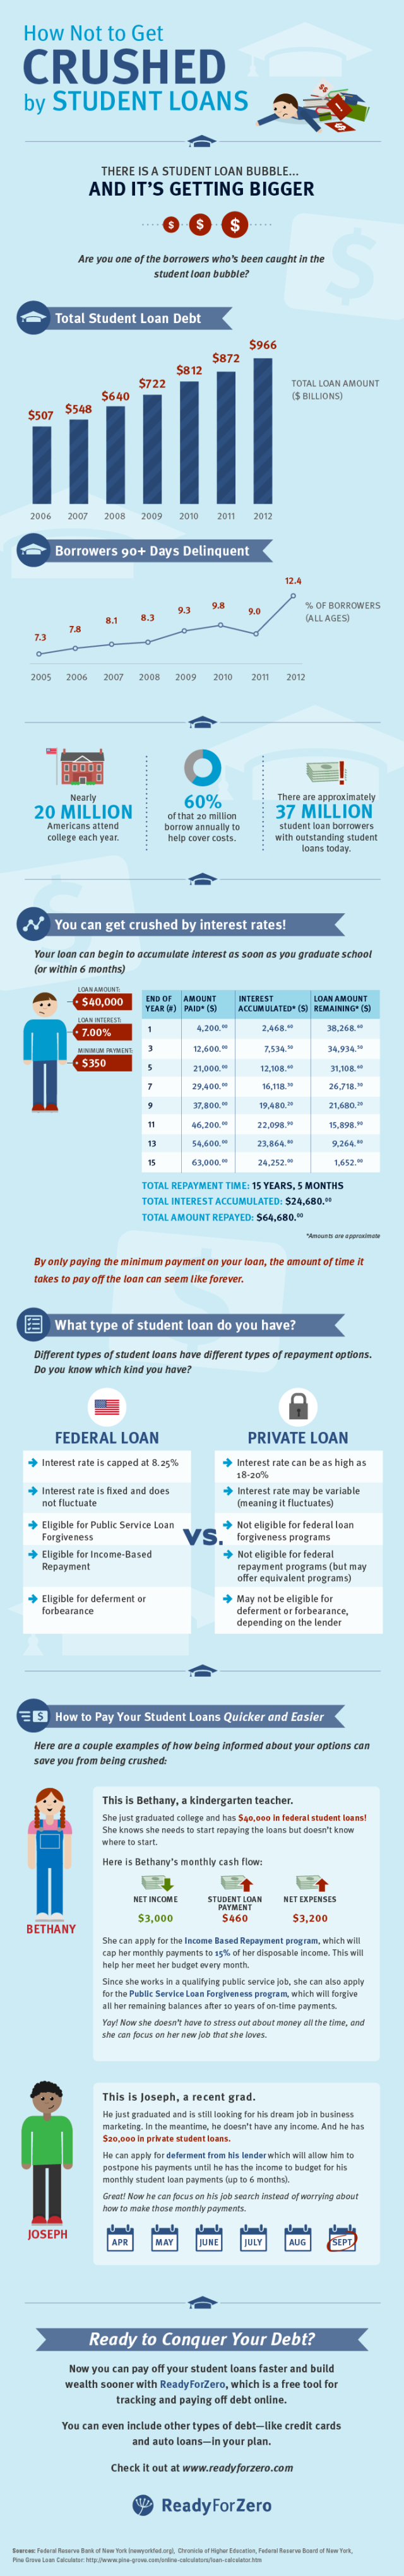 Do you have student loans? You need to see this now- (How not to get crushed)  (Info-graphic)